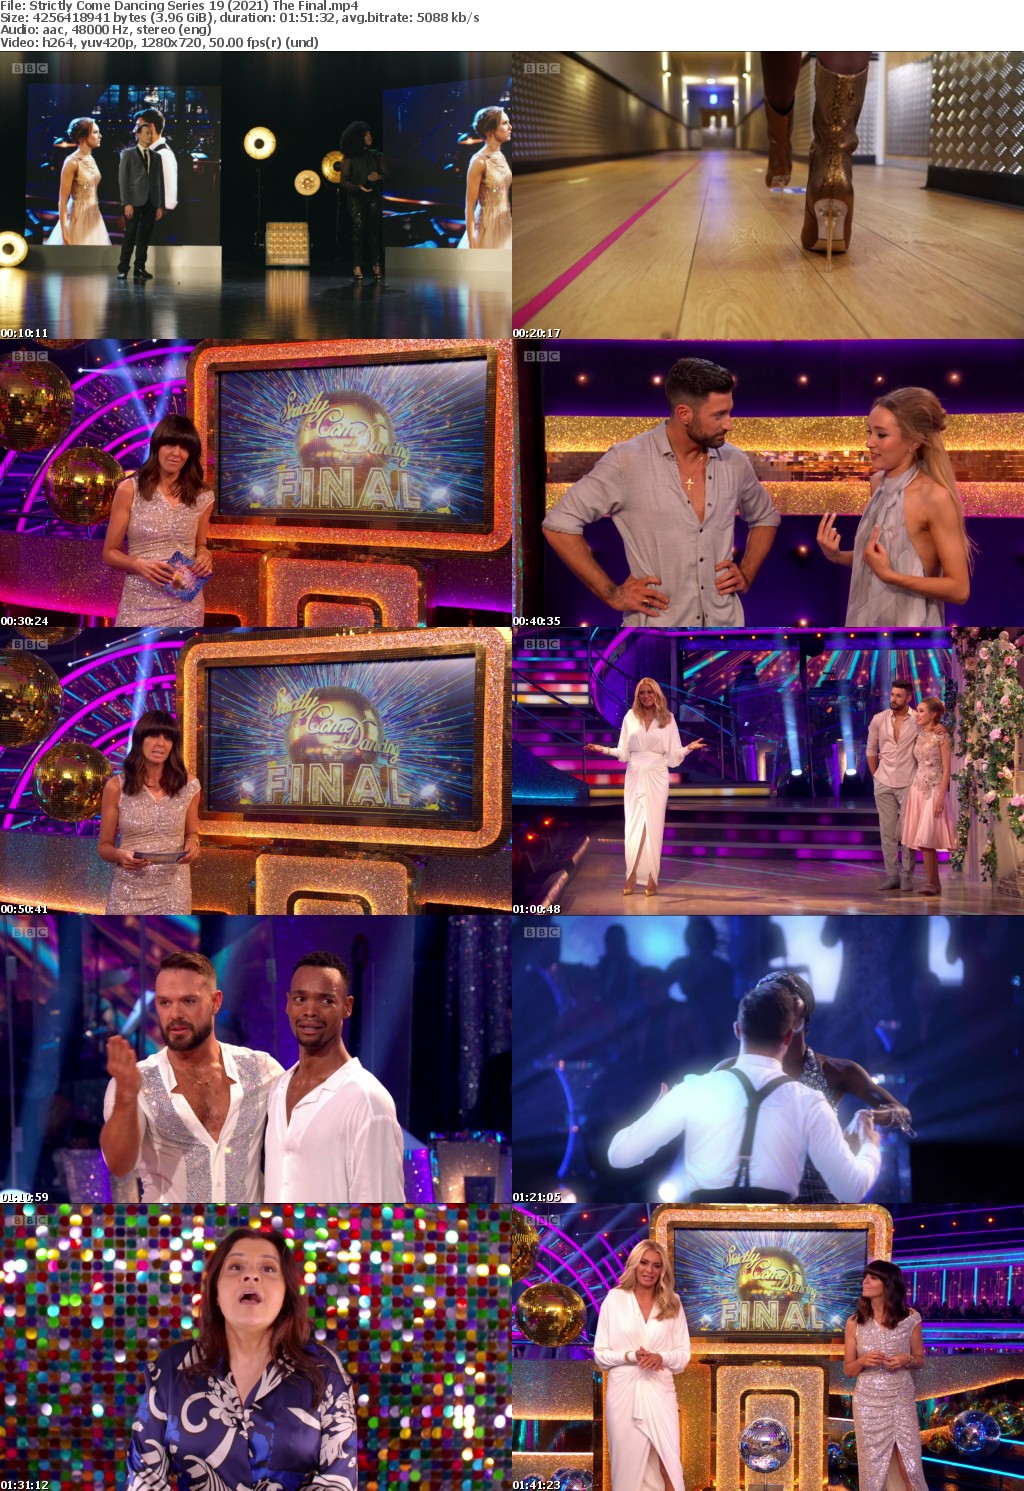 Strictly Come Dancing Series 19 (2021) The Final (1280x720p HD, 50fps, soft Eng subs)